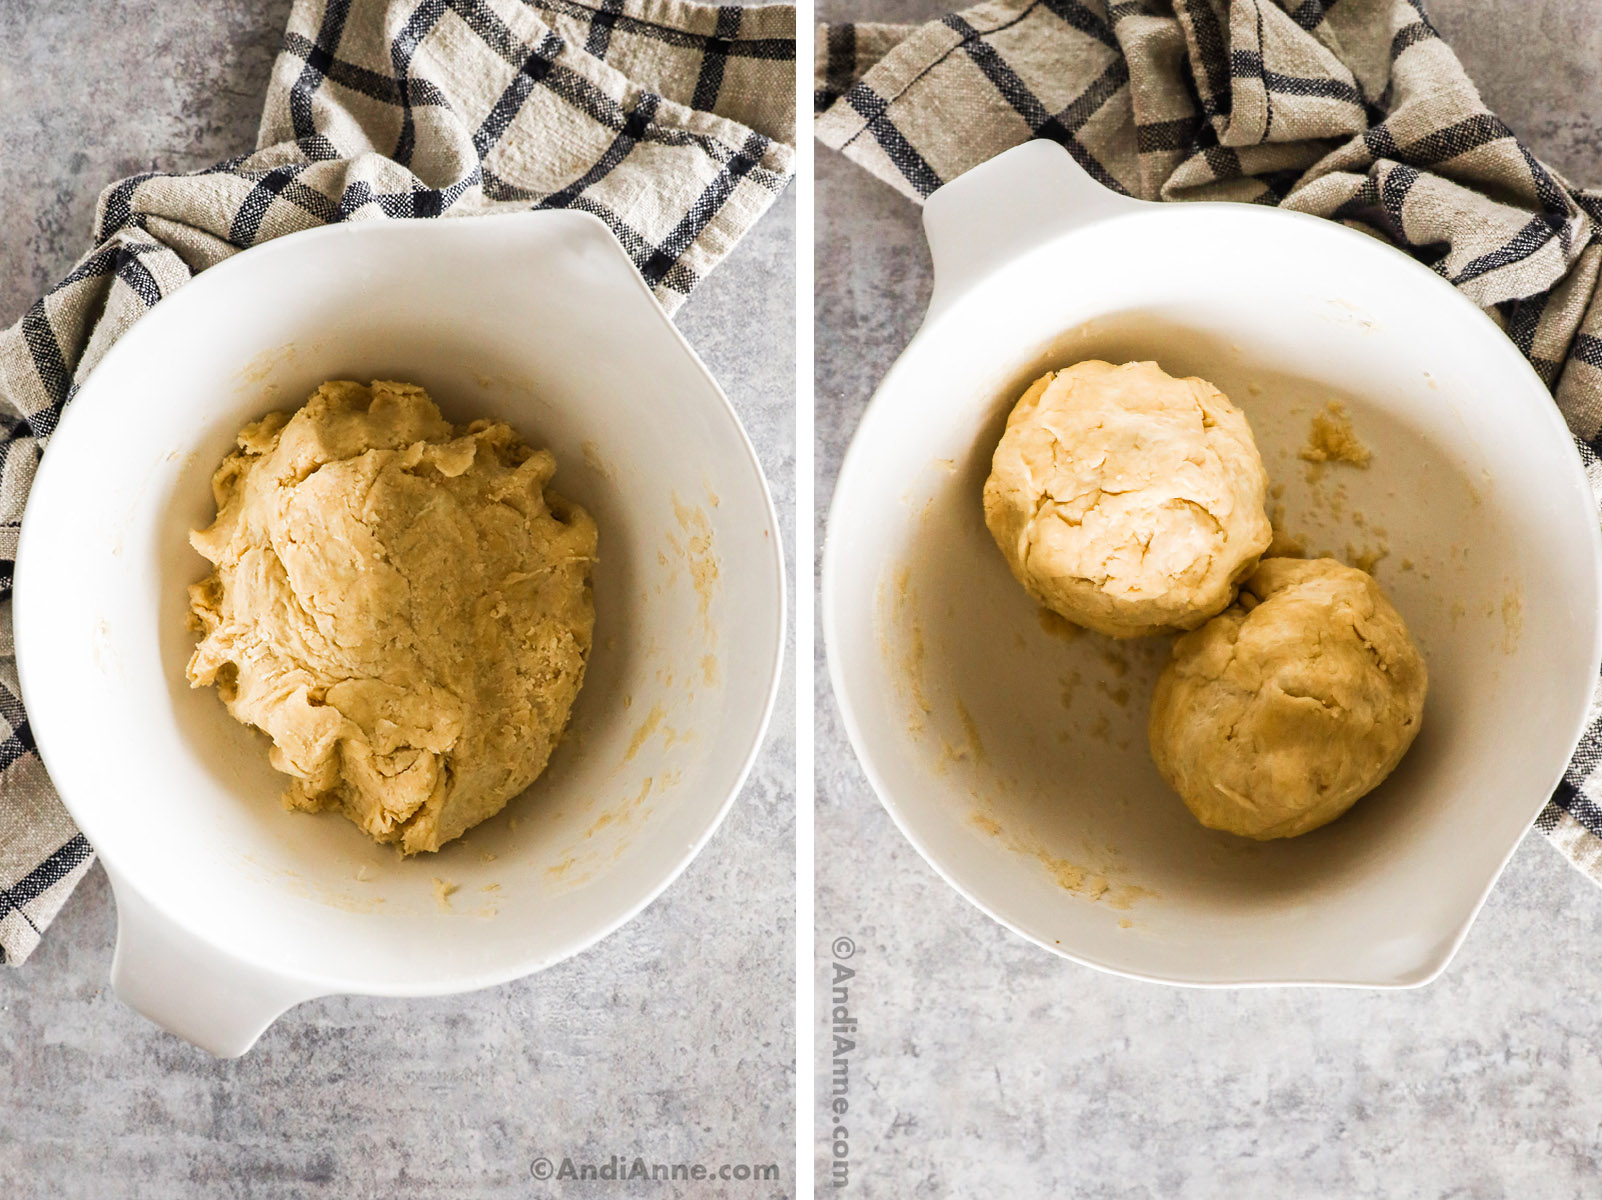 Two images of dough in bowl, first is one dough ball, second is two balls.